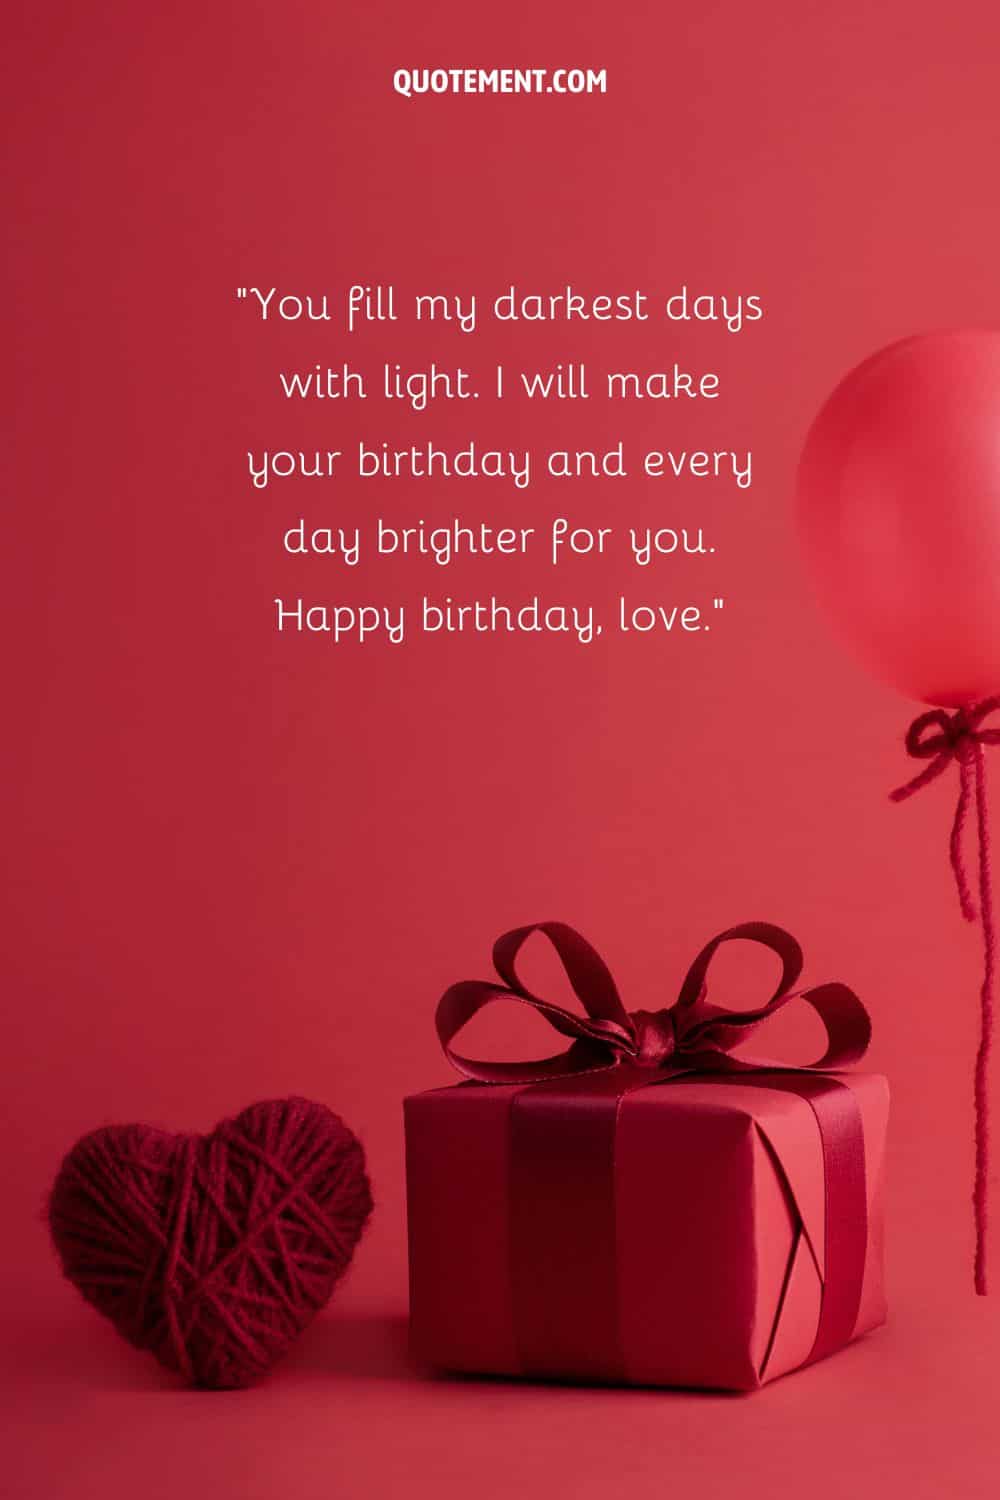 image of a red birthday gift box representing a romantic 66th birthday wish